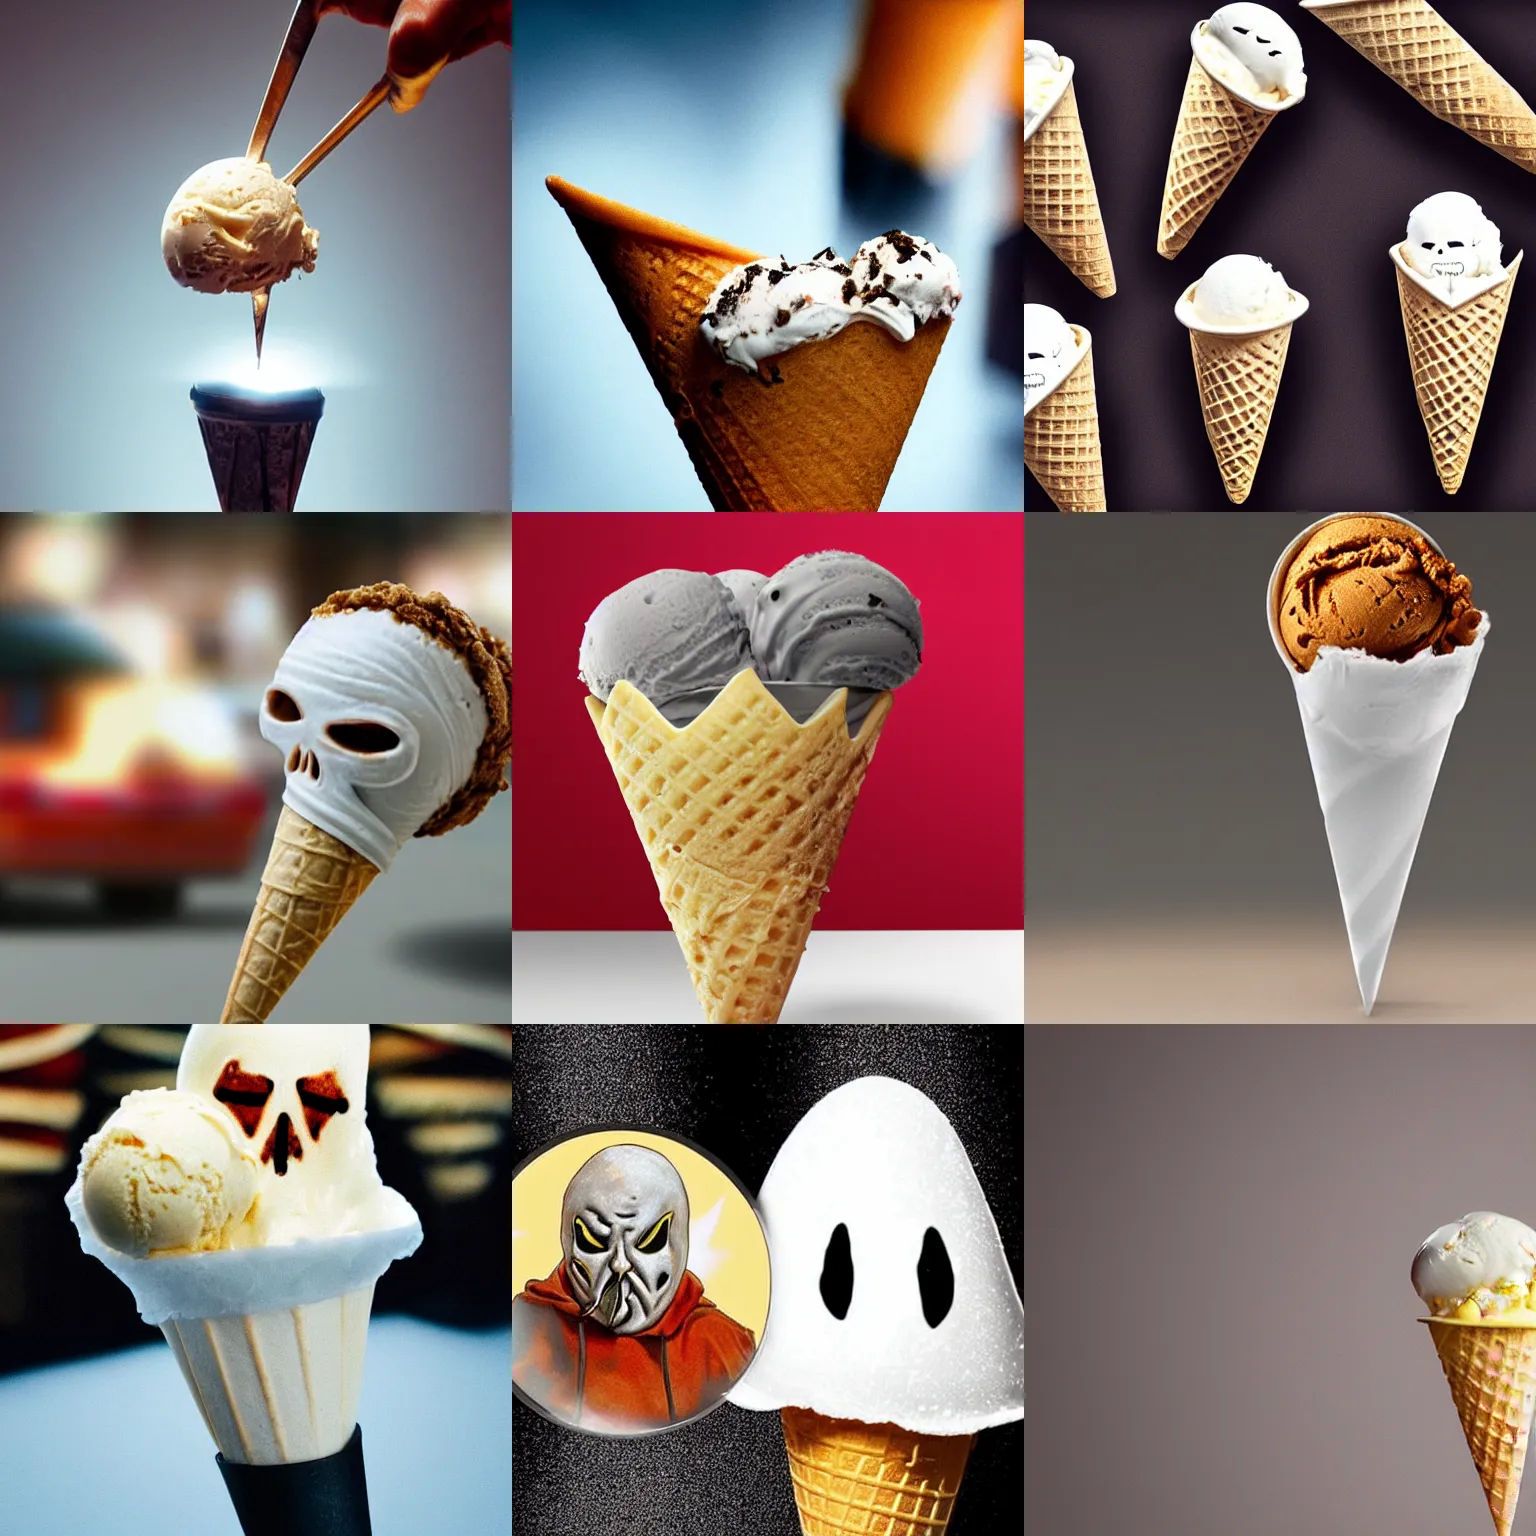 Prompt: a photo realistic image of an ice cream scoop in a cone shaped like ghostface scream film